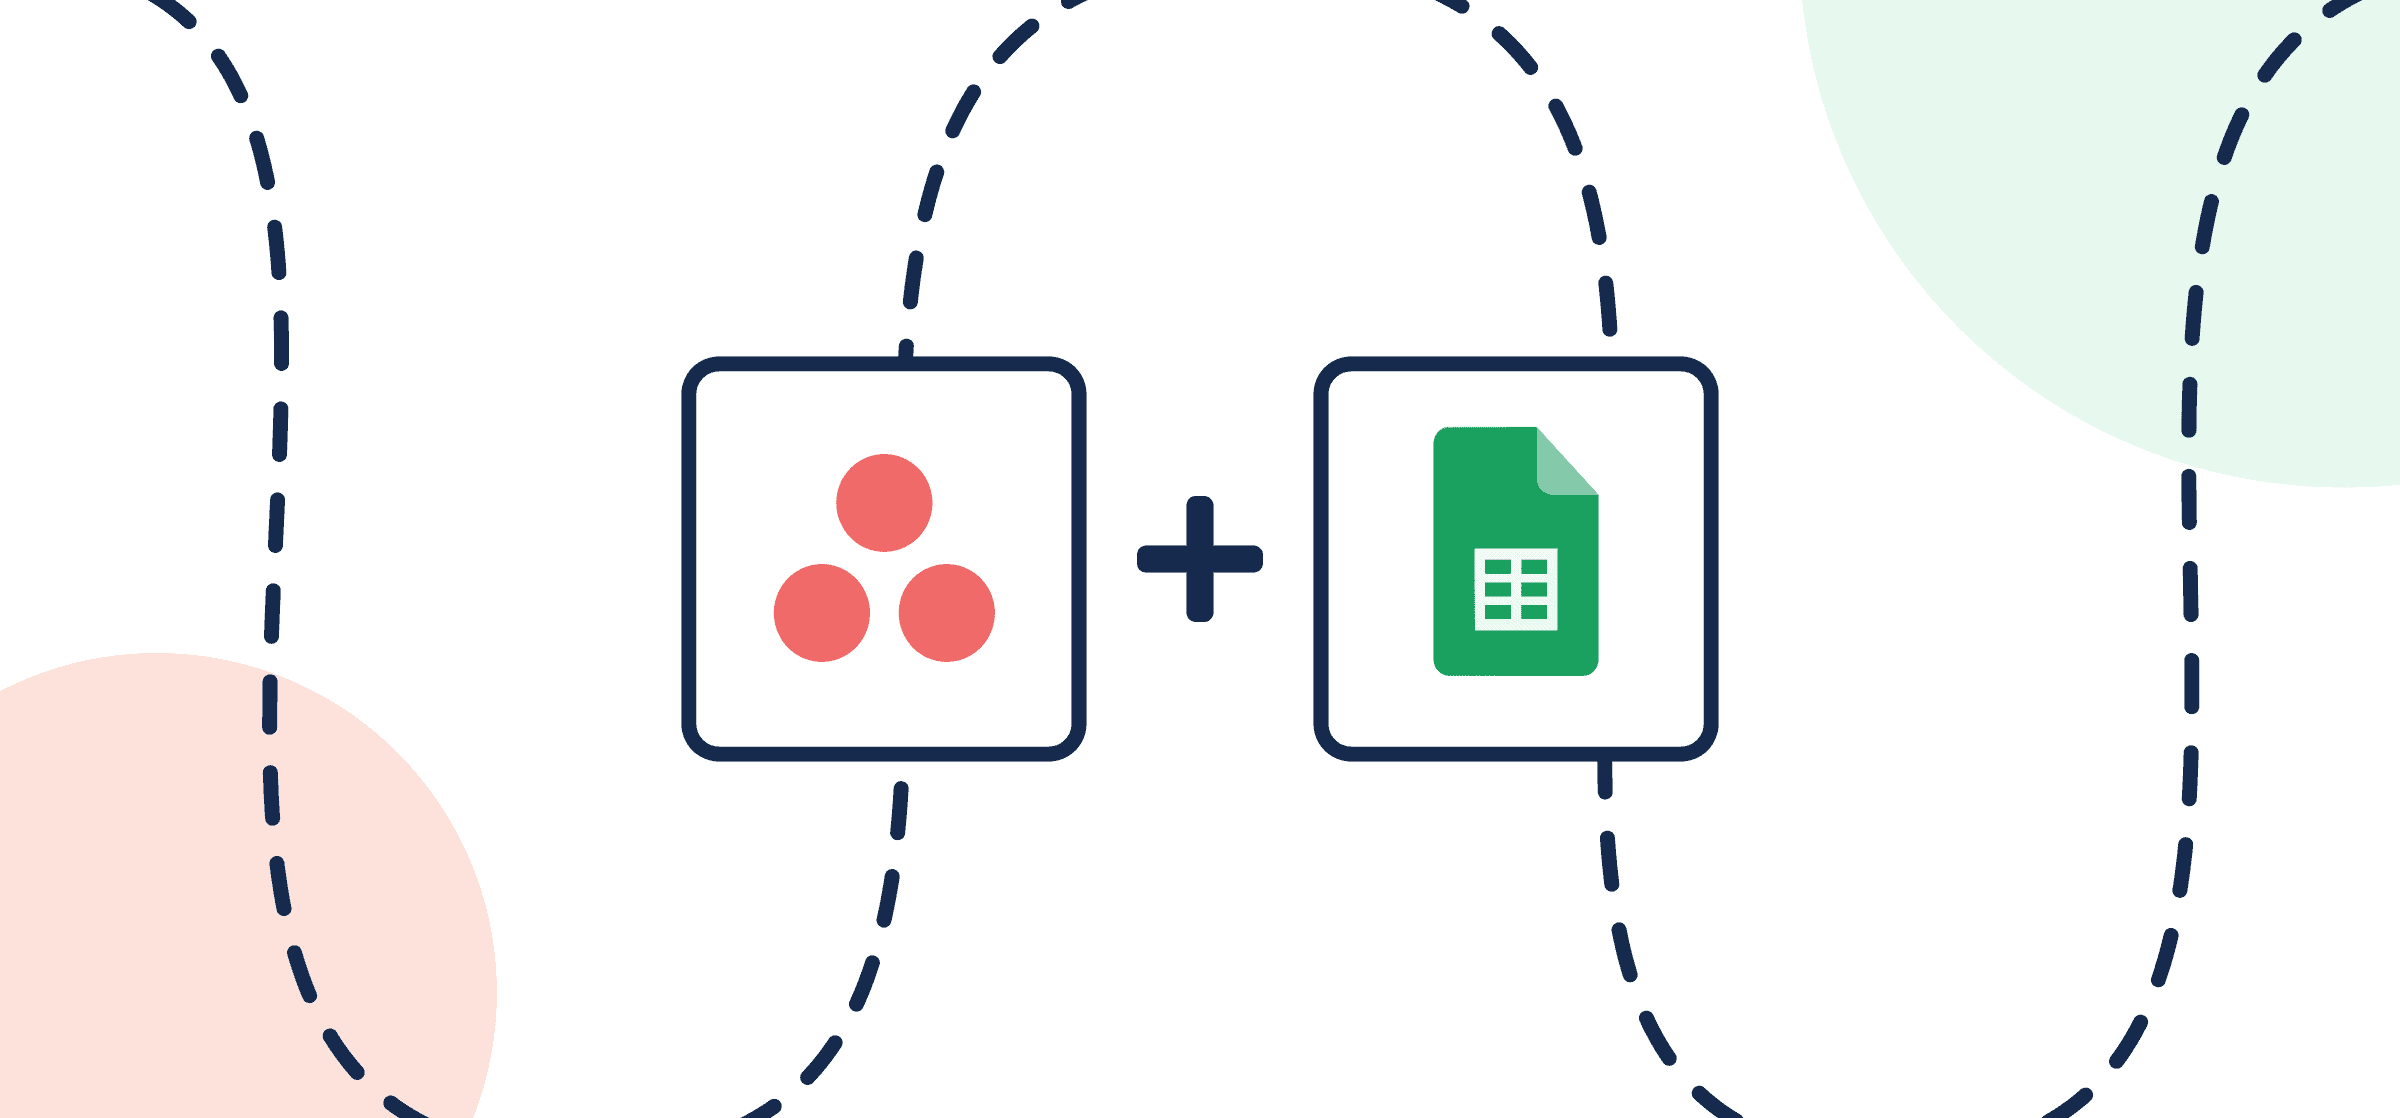 Featured image illustrating a step-by-step guide on syncing Asana to Google Sheets through Unito, depicted by the connected logos through circles and dotted lines.